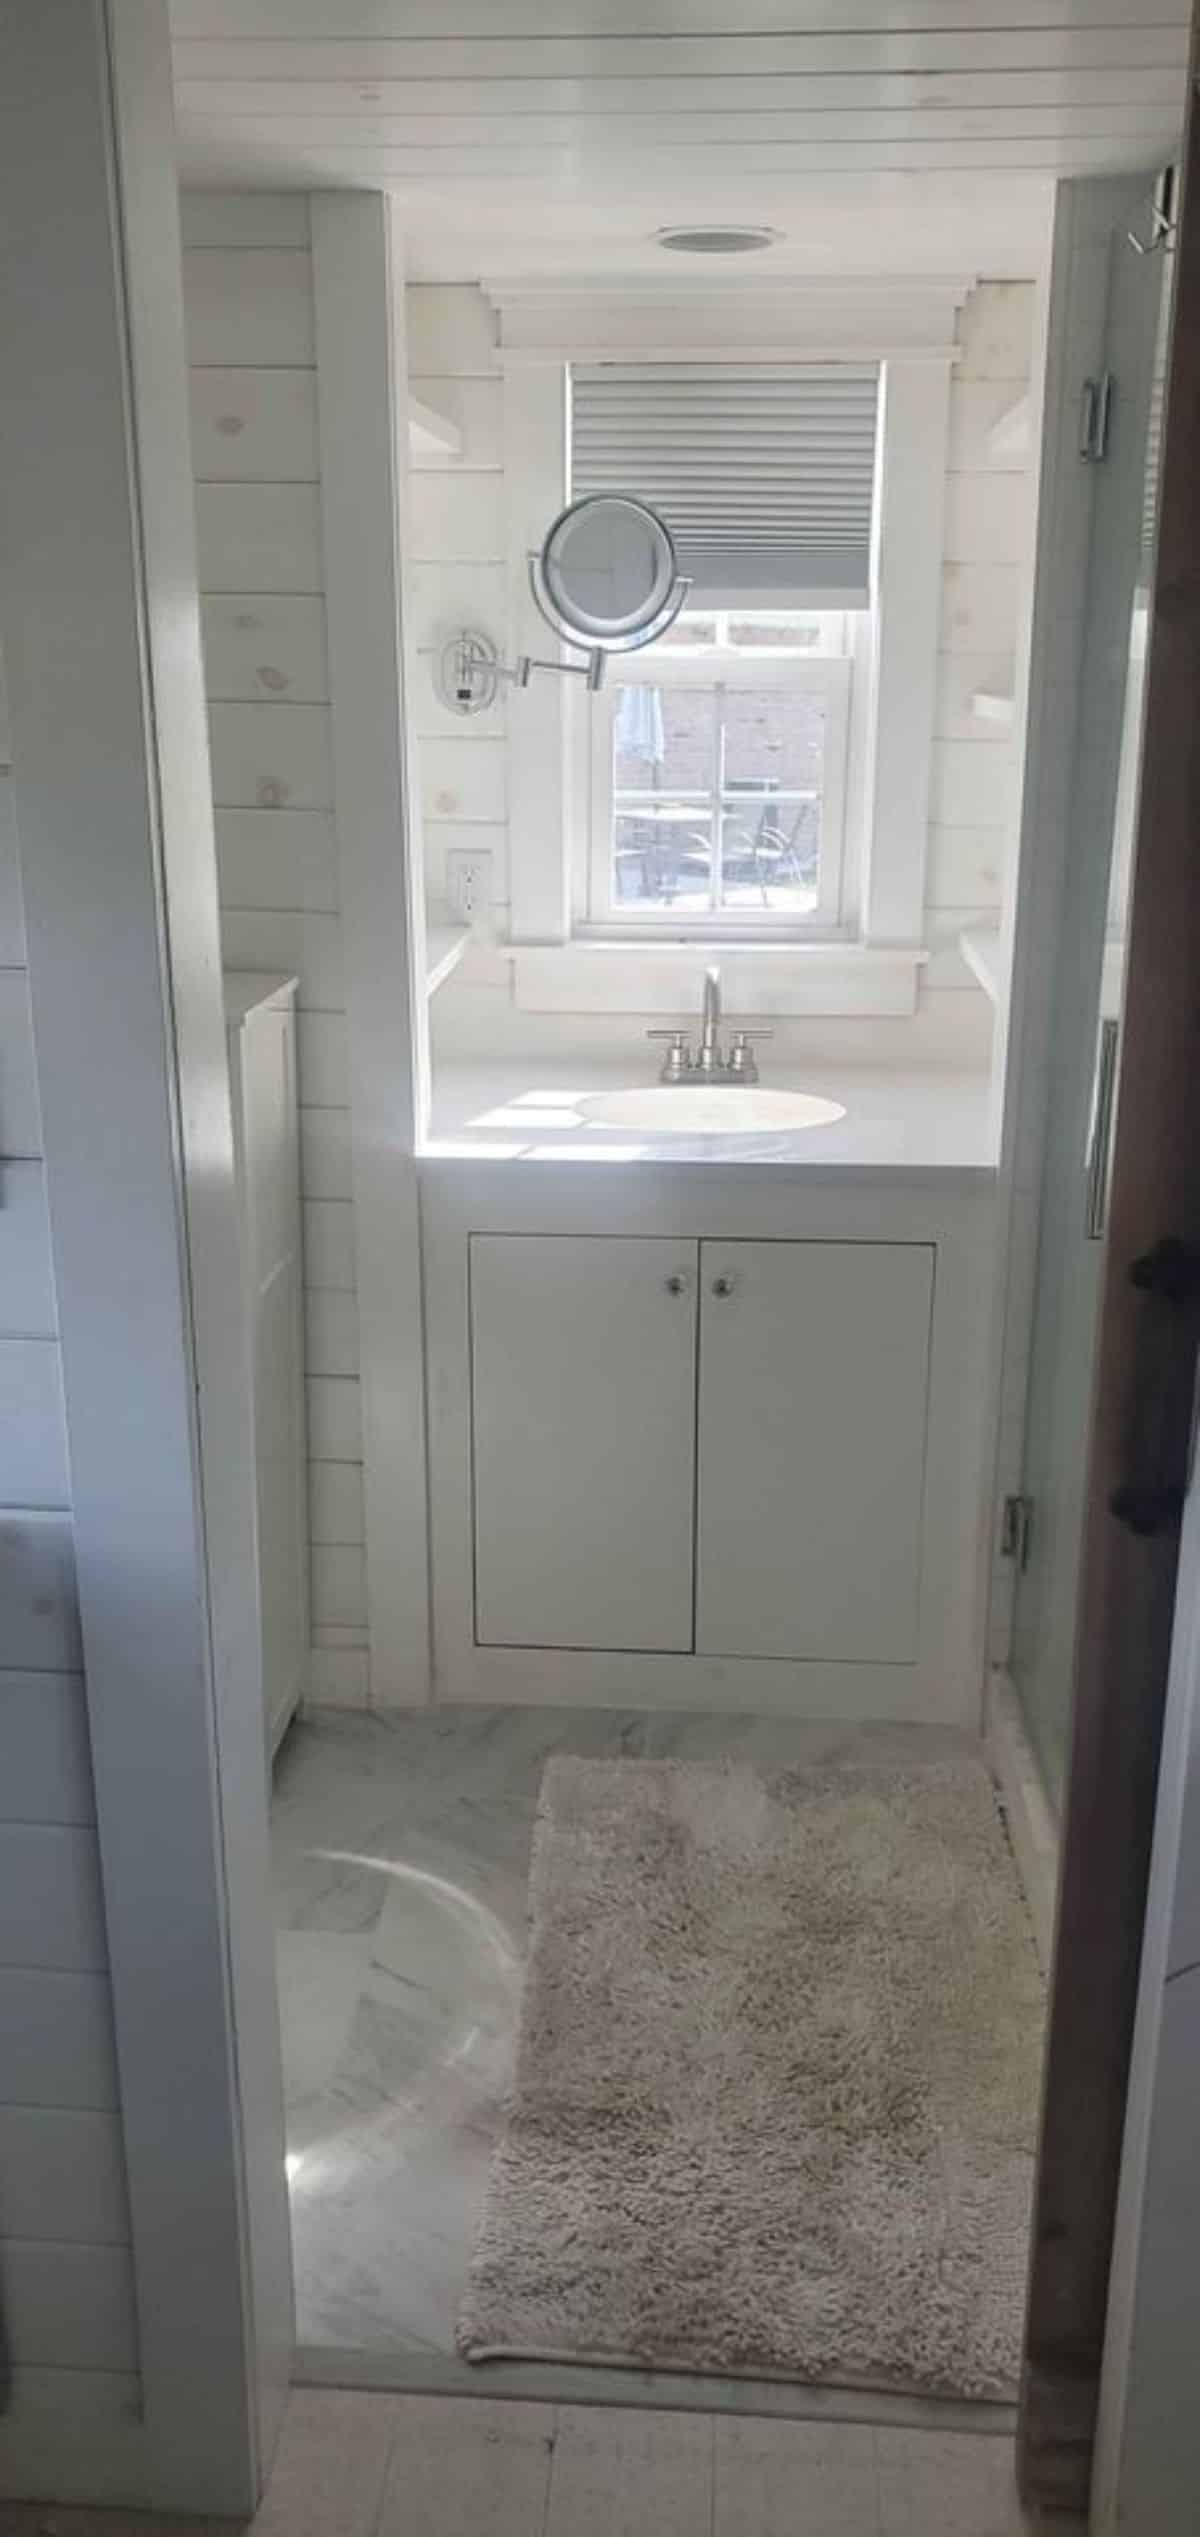 Bathroom of 24’ Tiny House has a sink with vanity and mirror and separate shower area